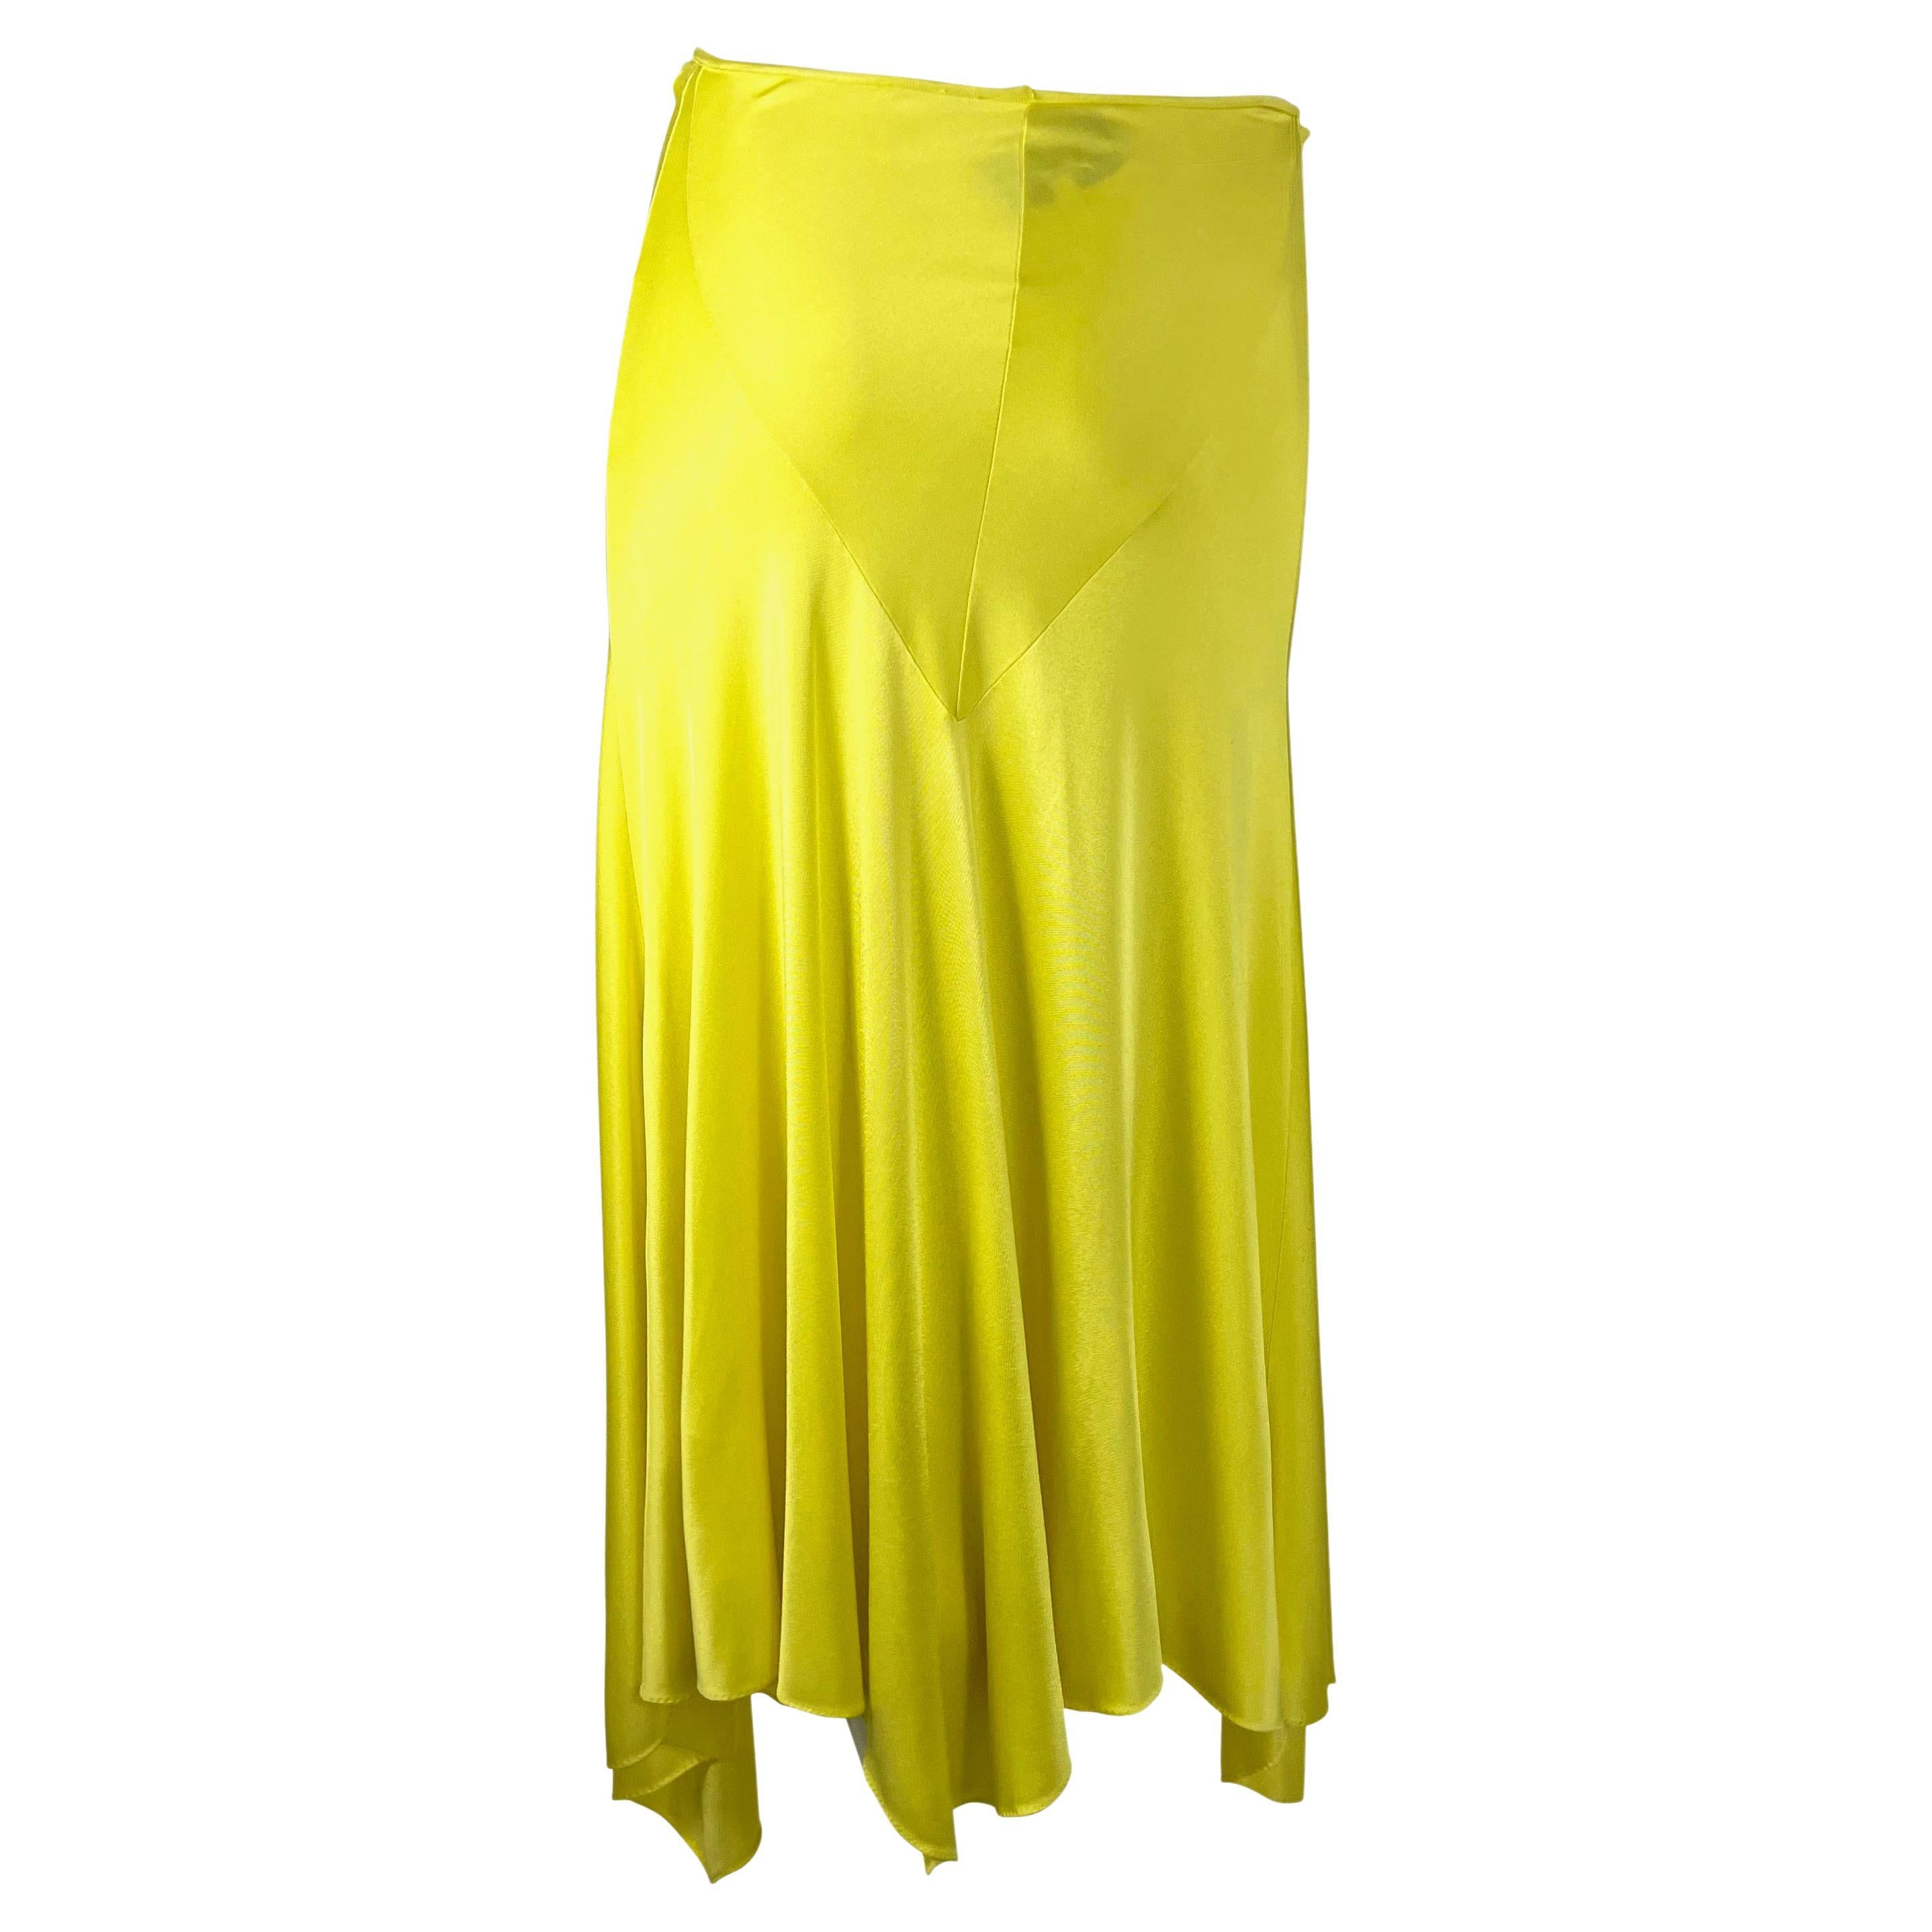 S/S 2004 Yves Saint Laurent by Tom Ford Canary Yellow Stretch Maxi Skirt In Excellent Condition For Sale In West Hollywood, CA